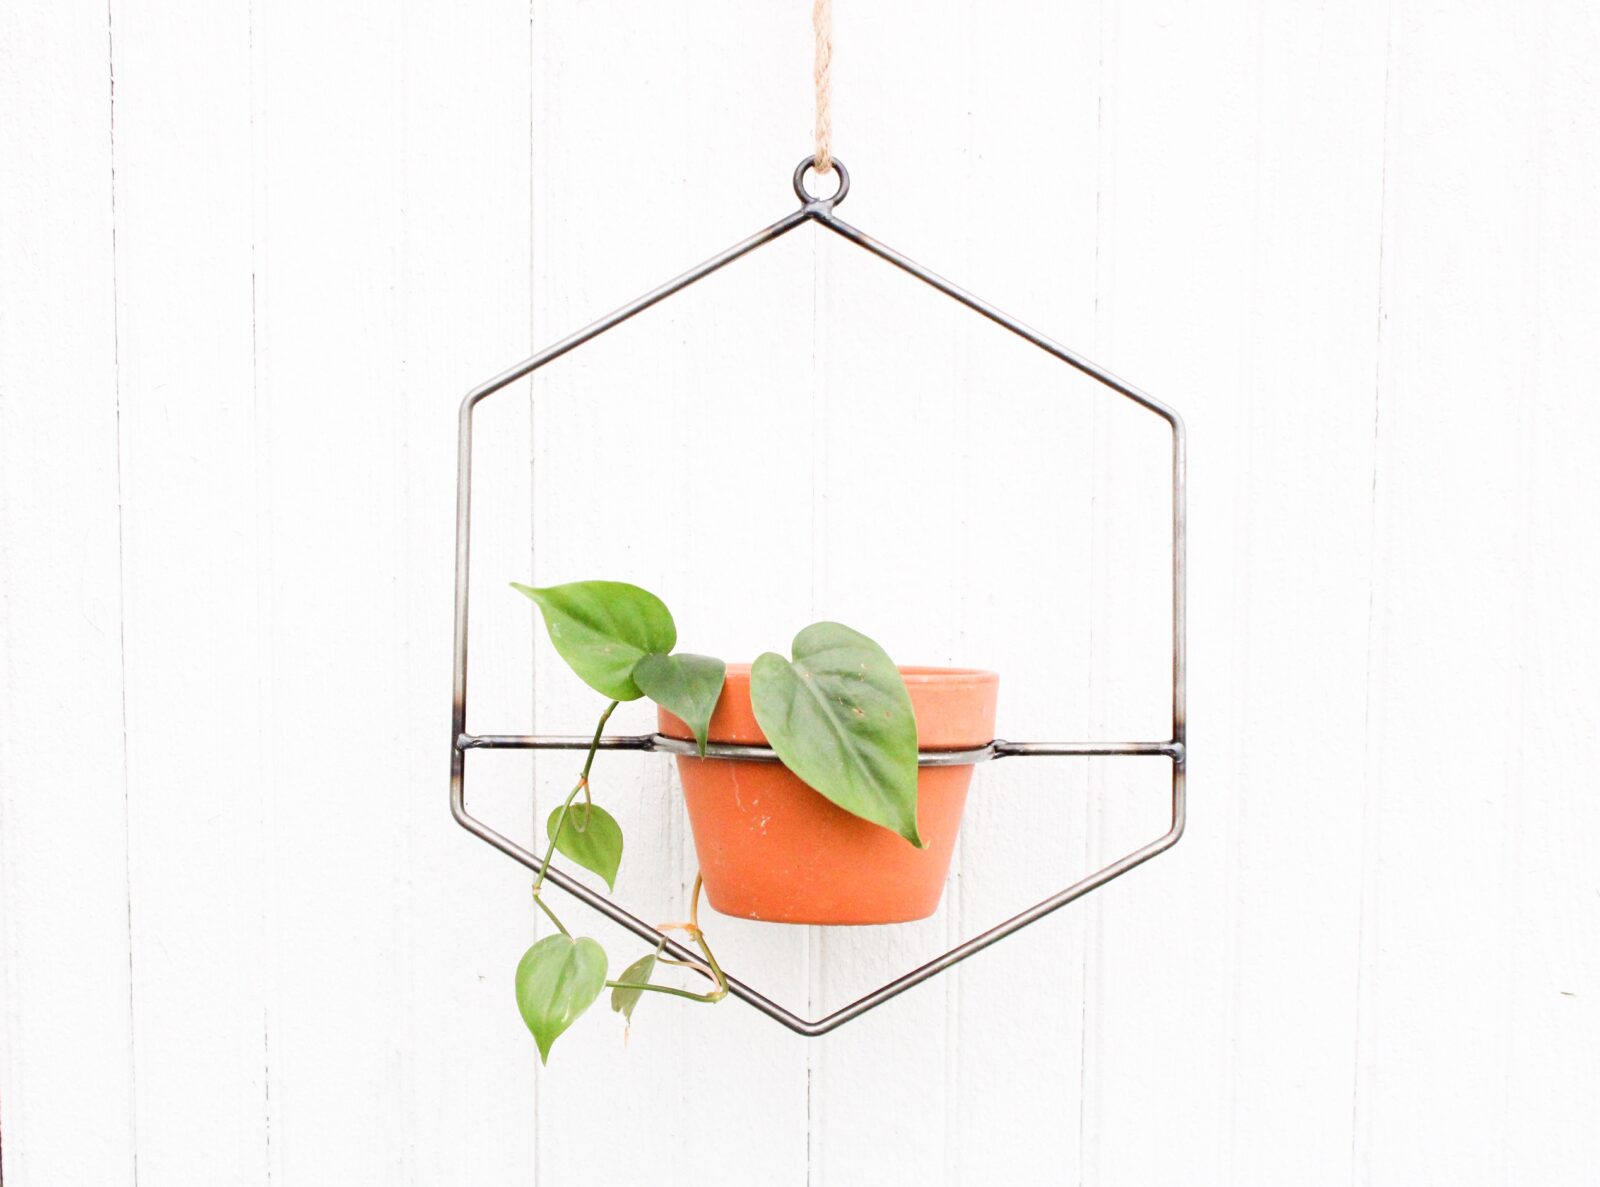 How to Hang a Plant from the Ceiling